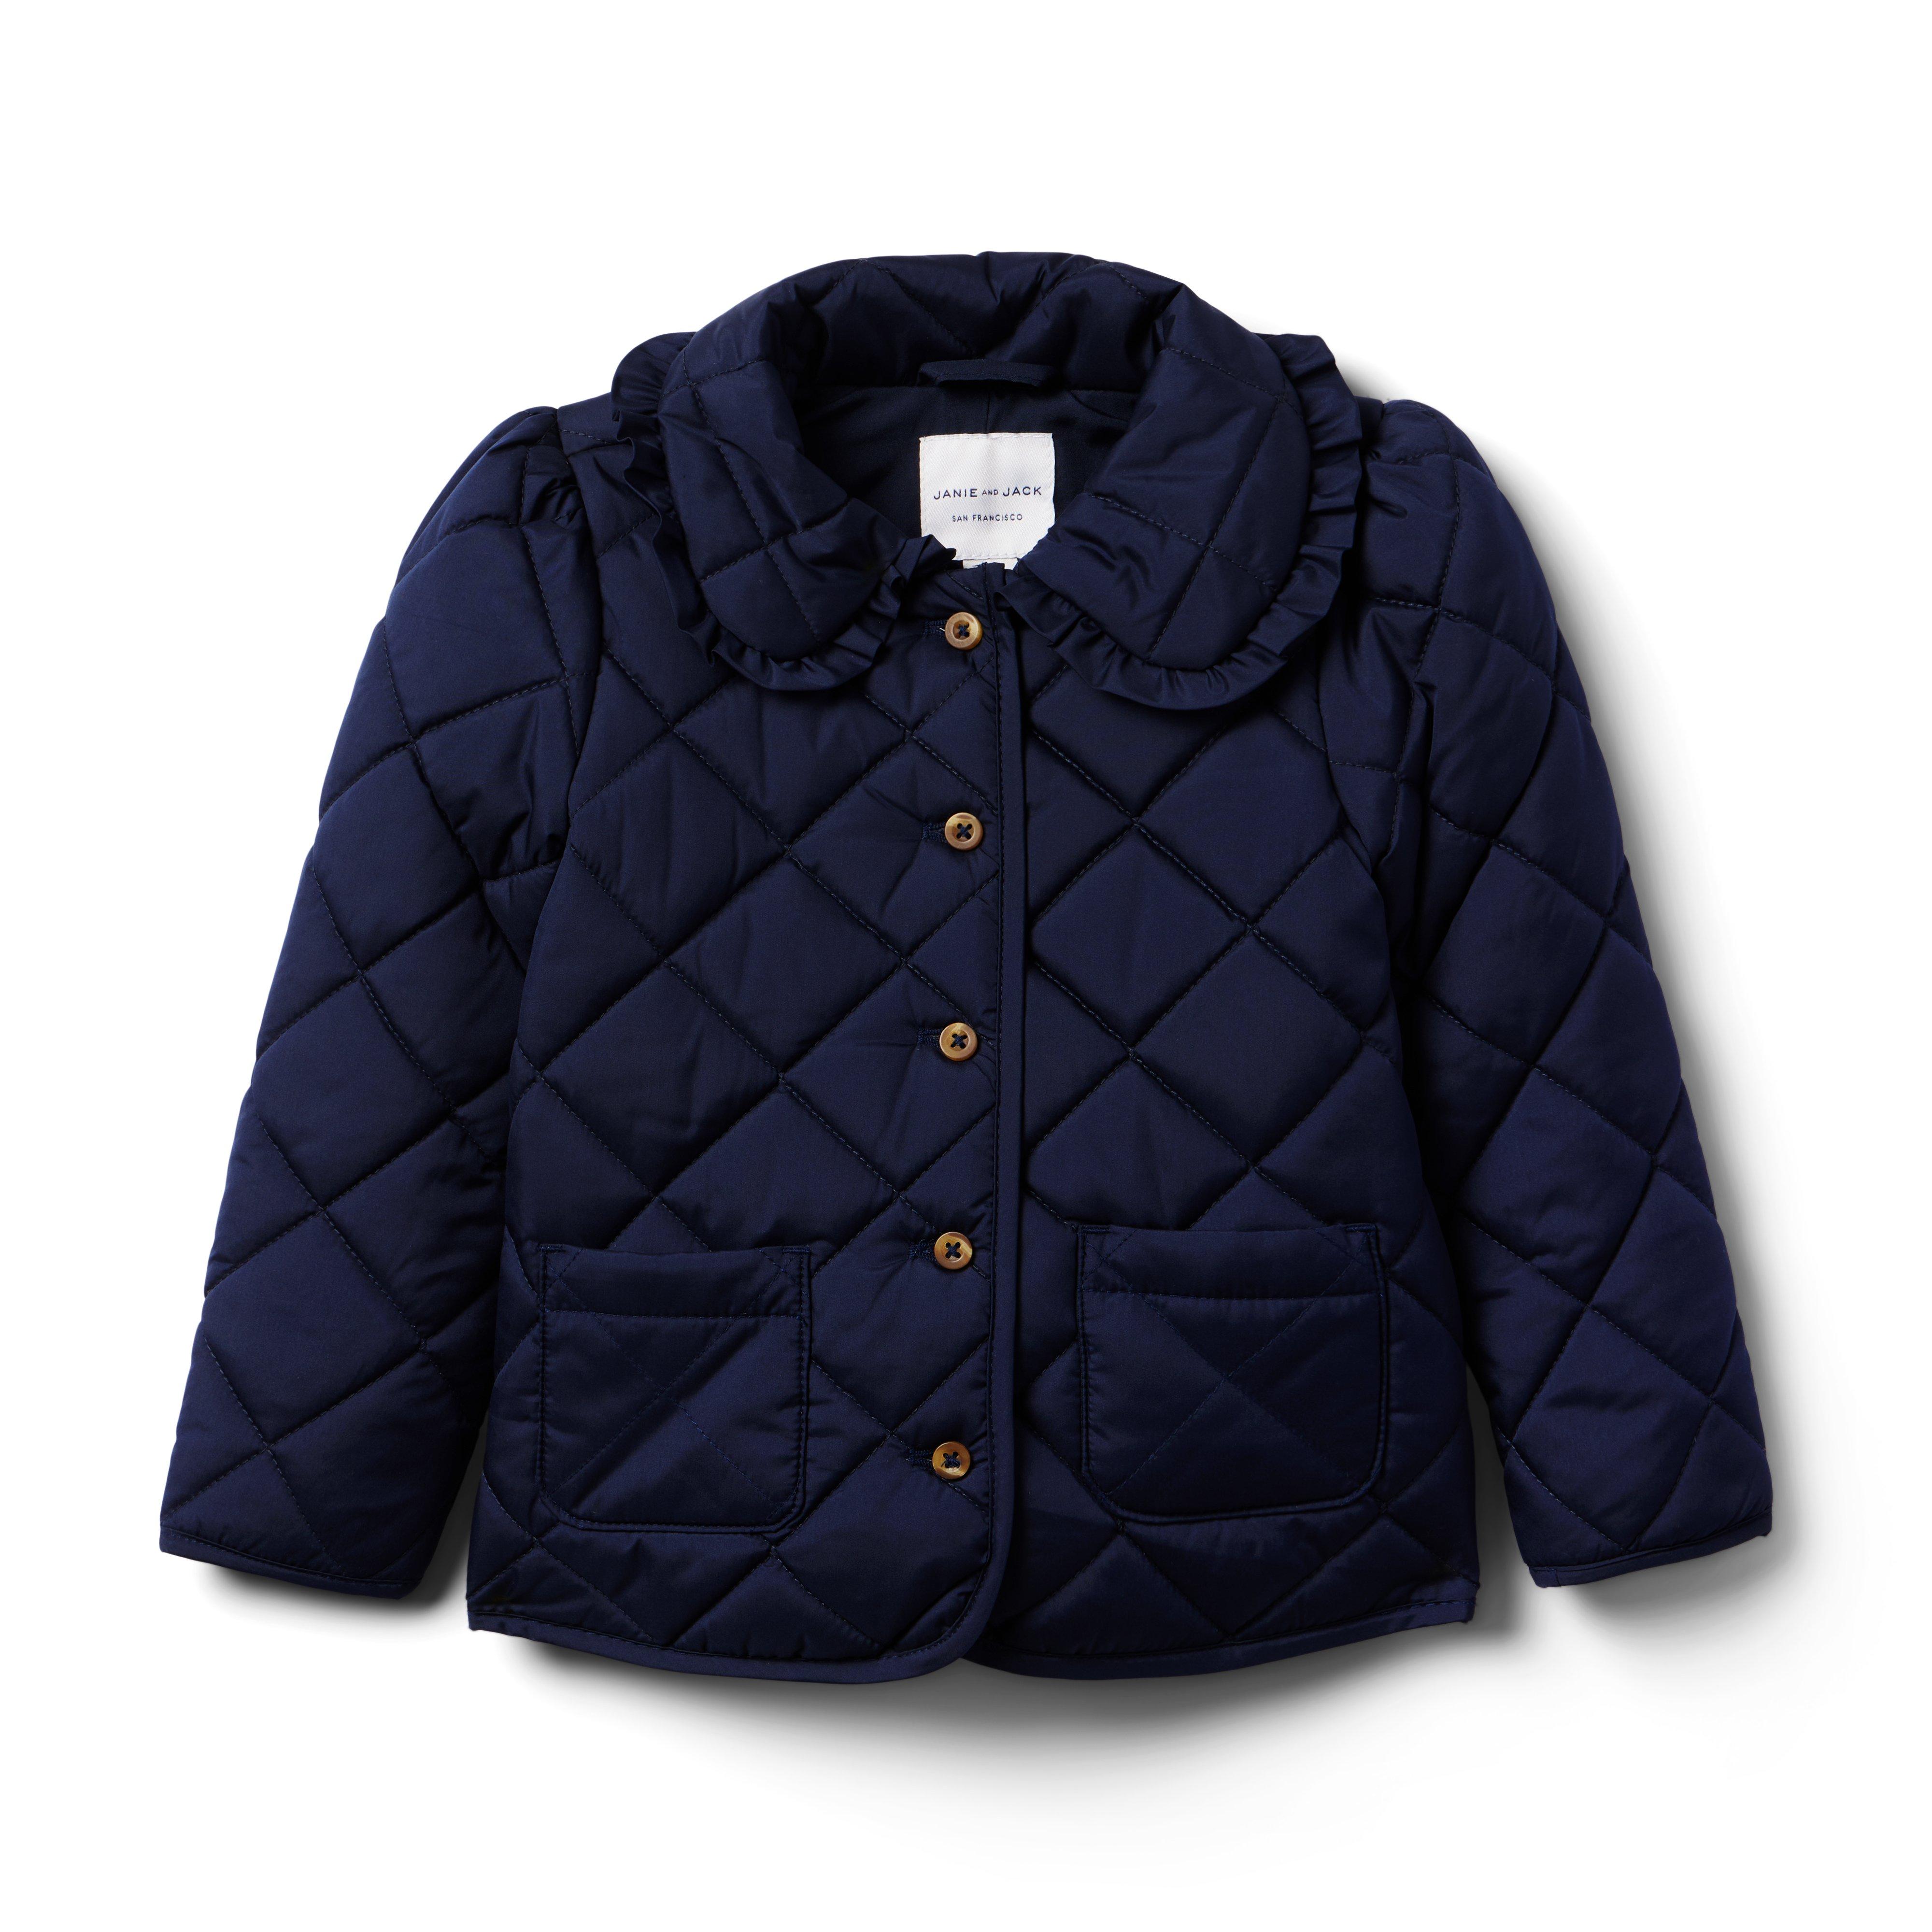 The Quilted Ruffle Collar Jacket